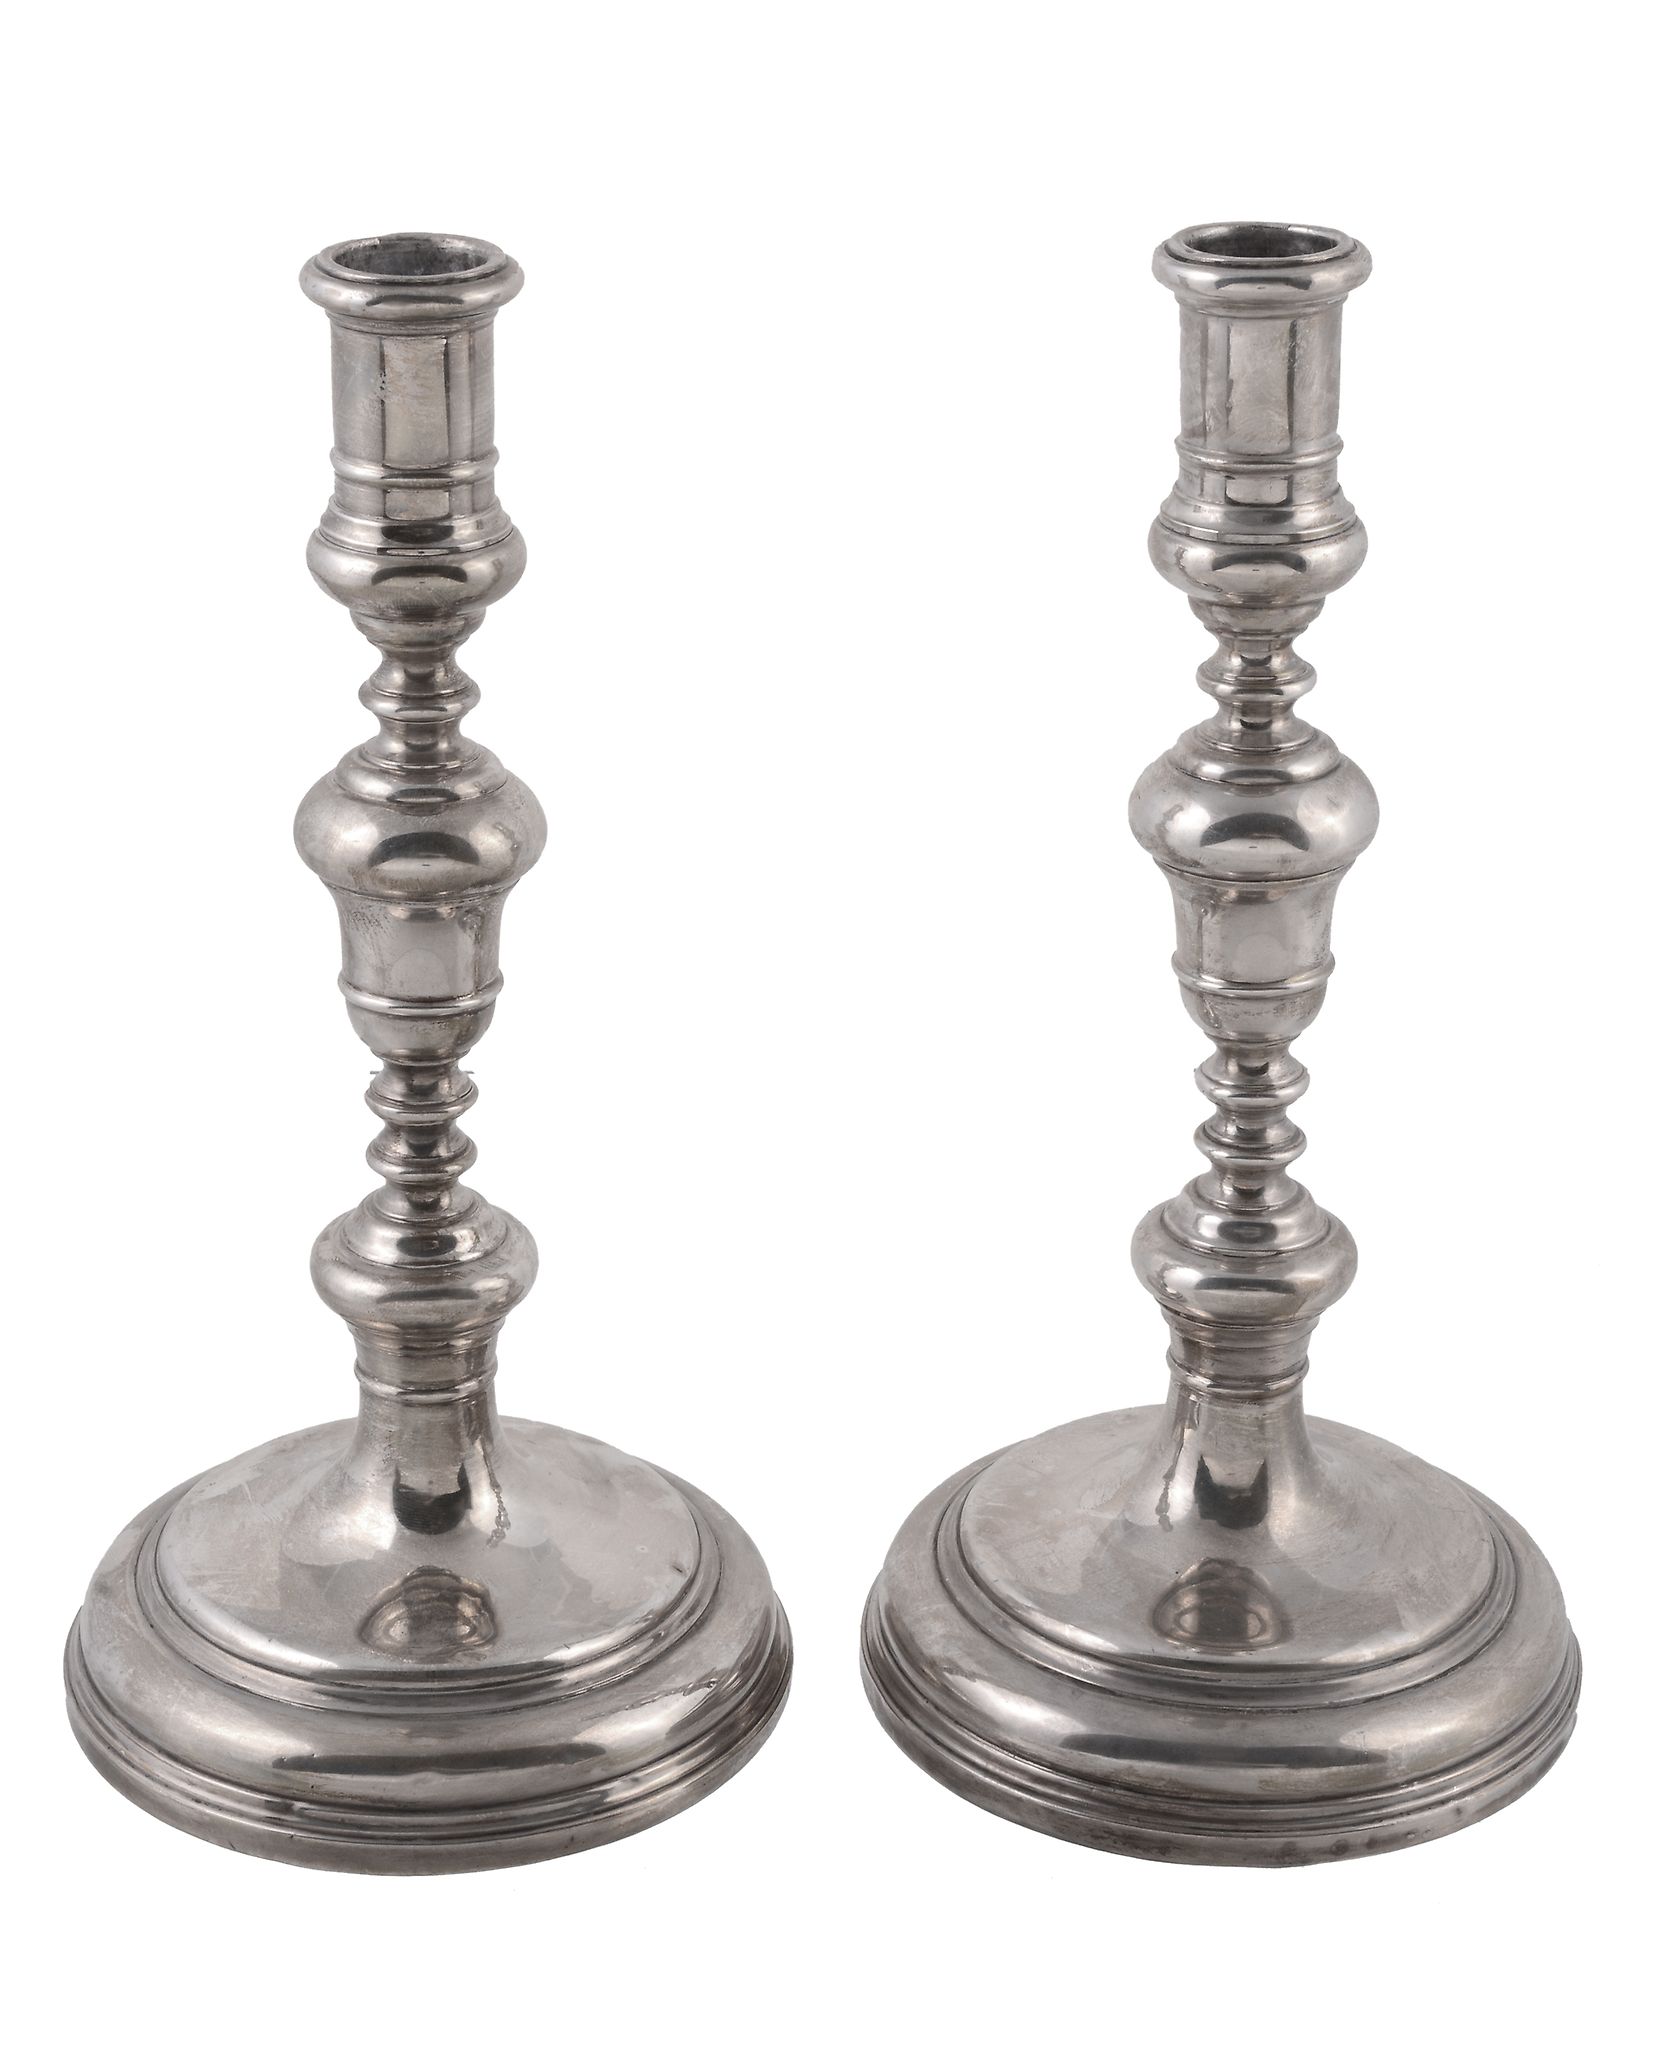 A pair of silver knopped baluster candlesticks by Richard Comyns  A pair of silver knopped